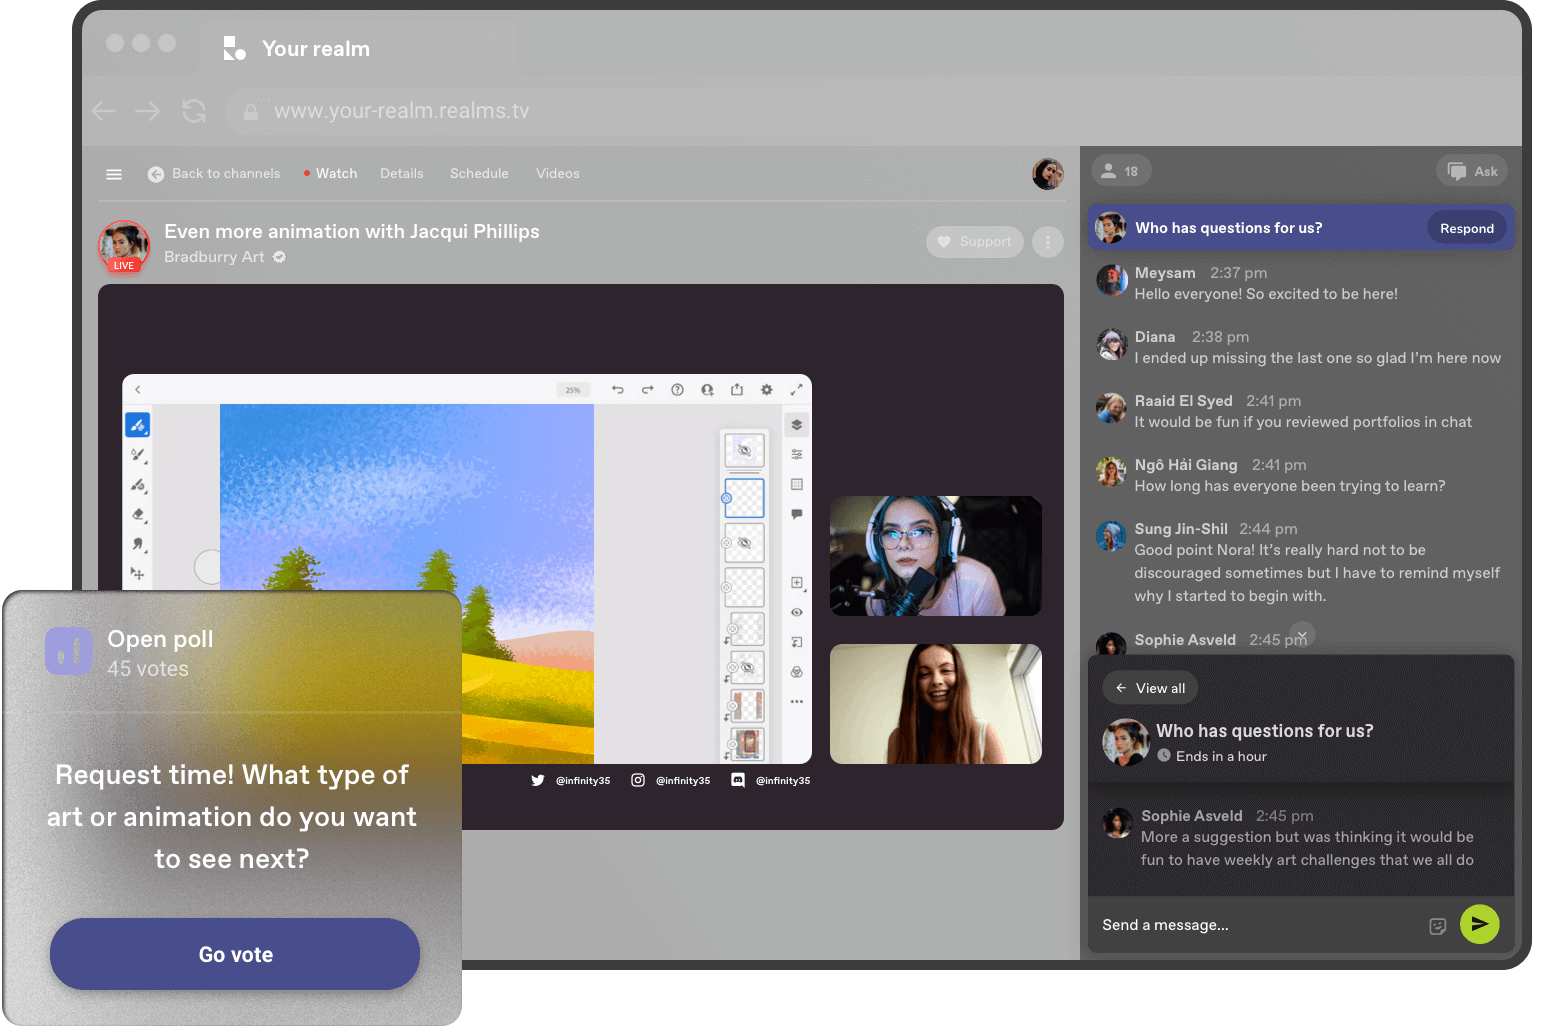 Live stream of two artists creating an illustration together with a poll asking chat what to do next.